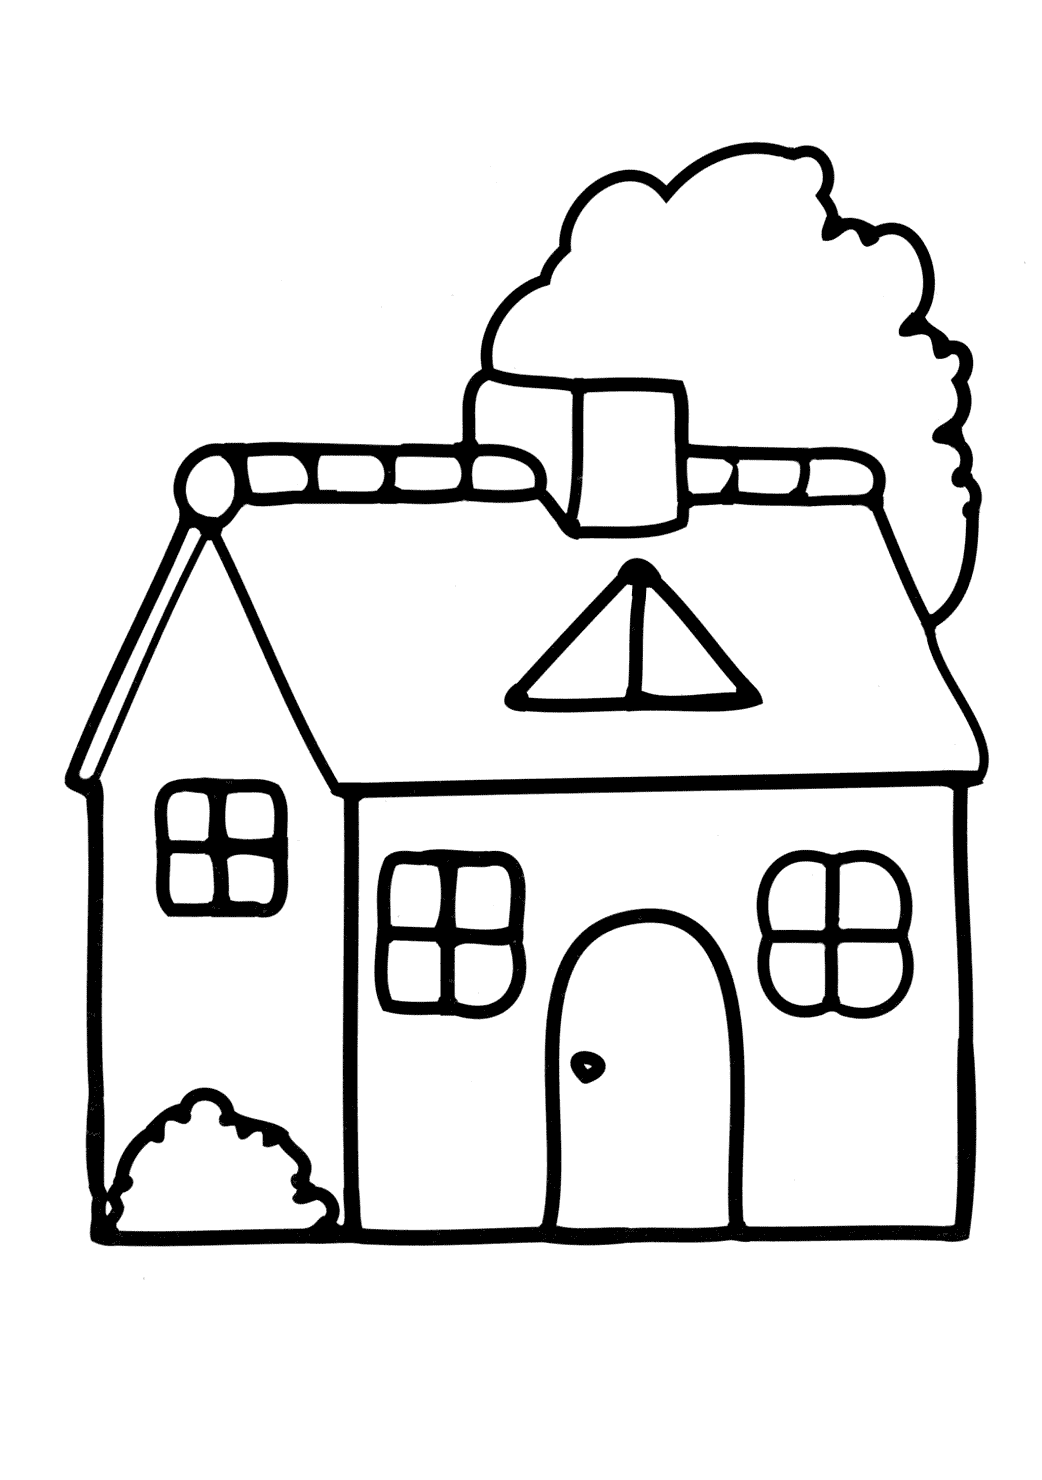 Coloring page - Home